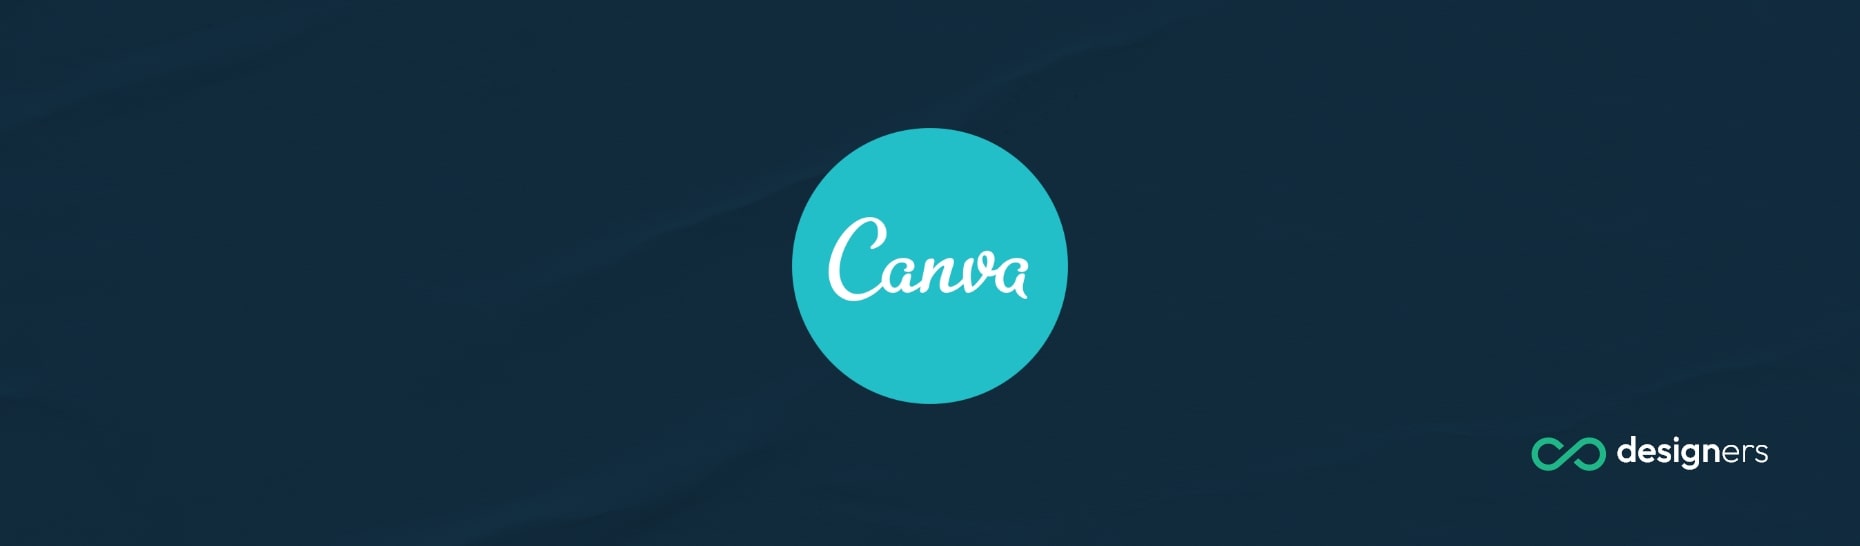 What Colour Codes Does Canva Use?